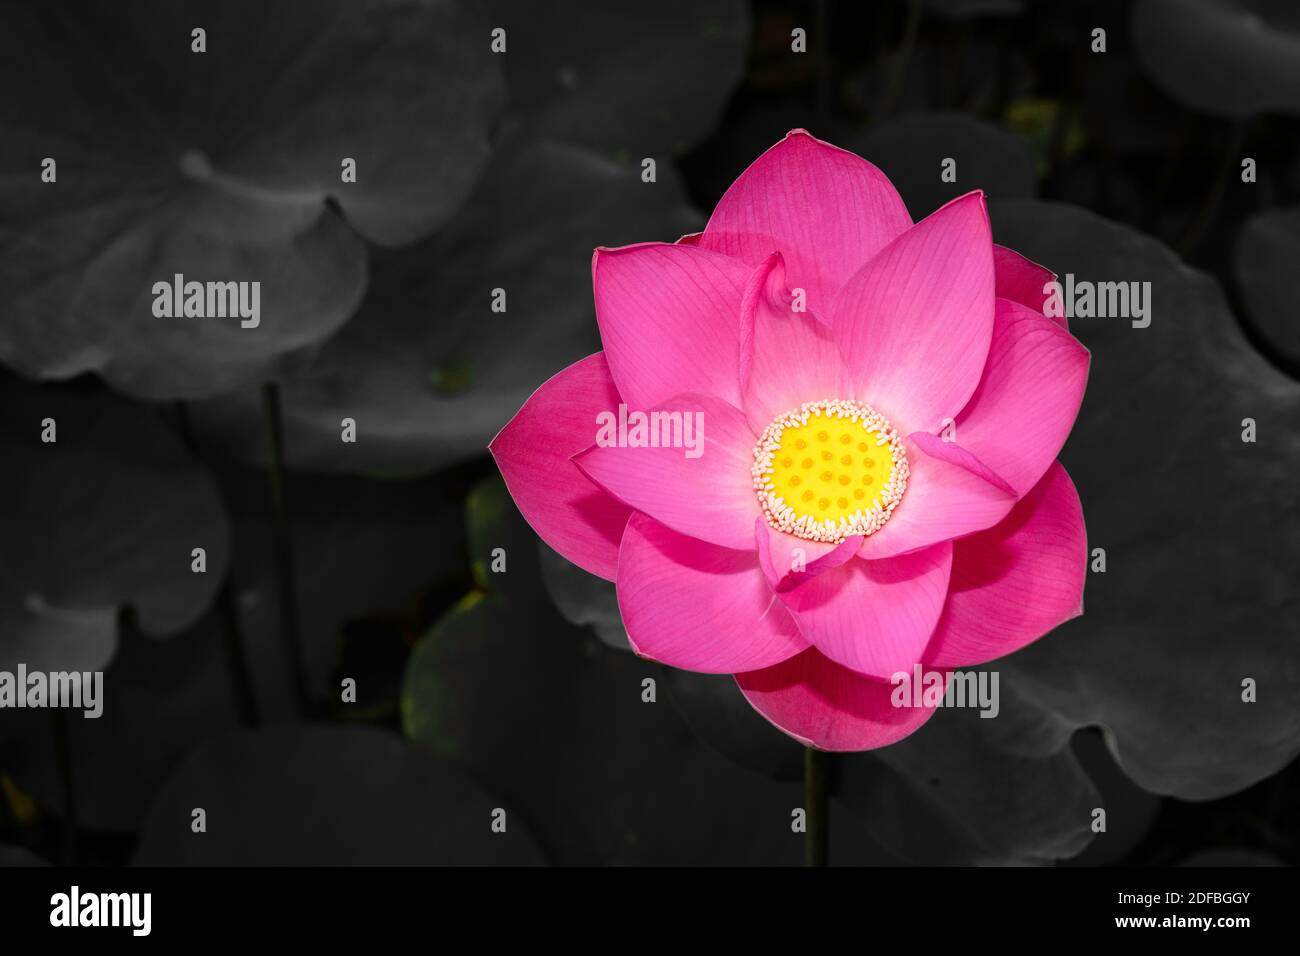 Lotus flowers In various stages of blooming; an Asian beauty, an Asian aphrodisiac Stock Photo